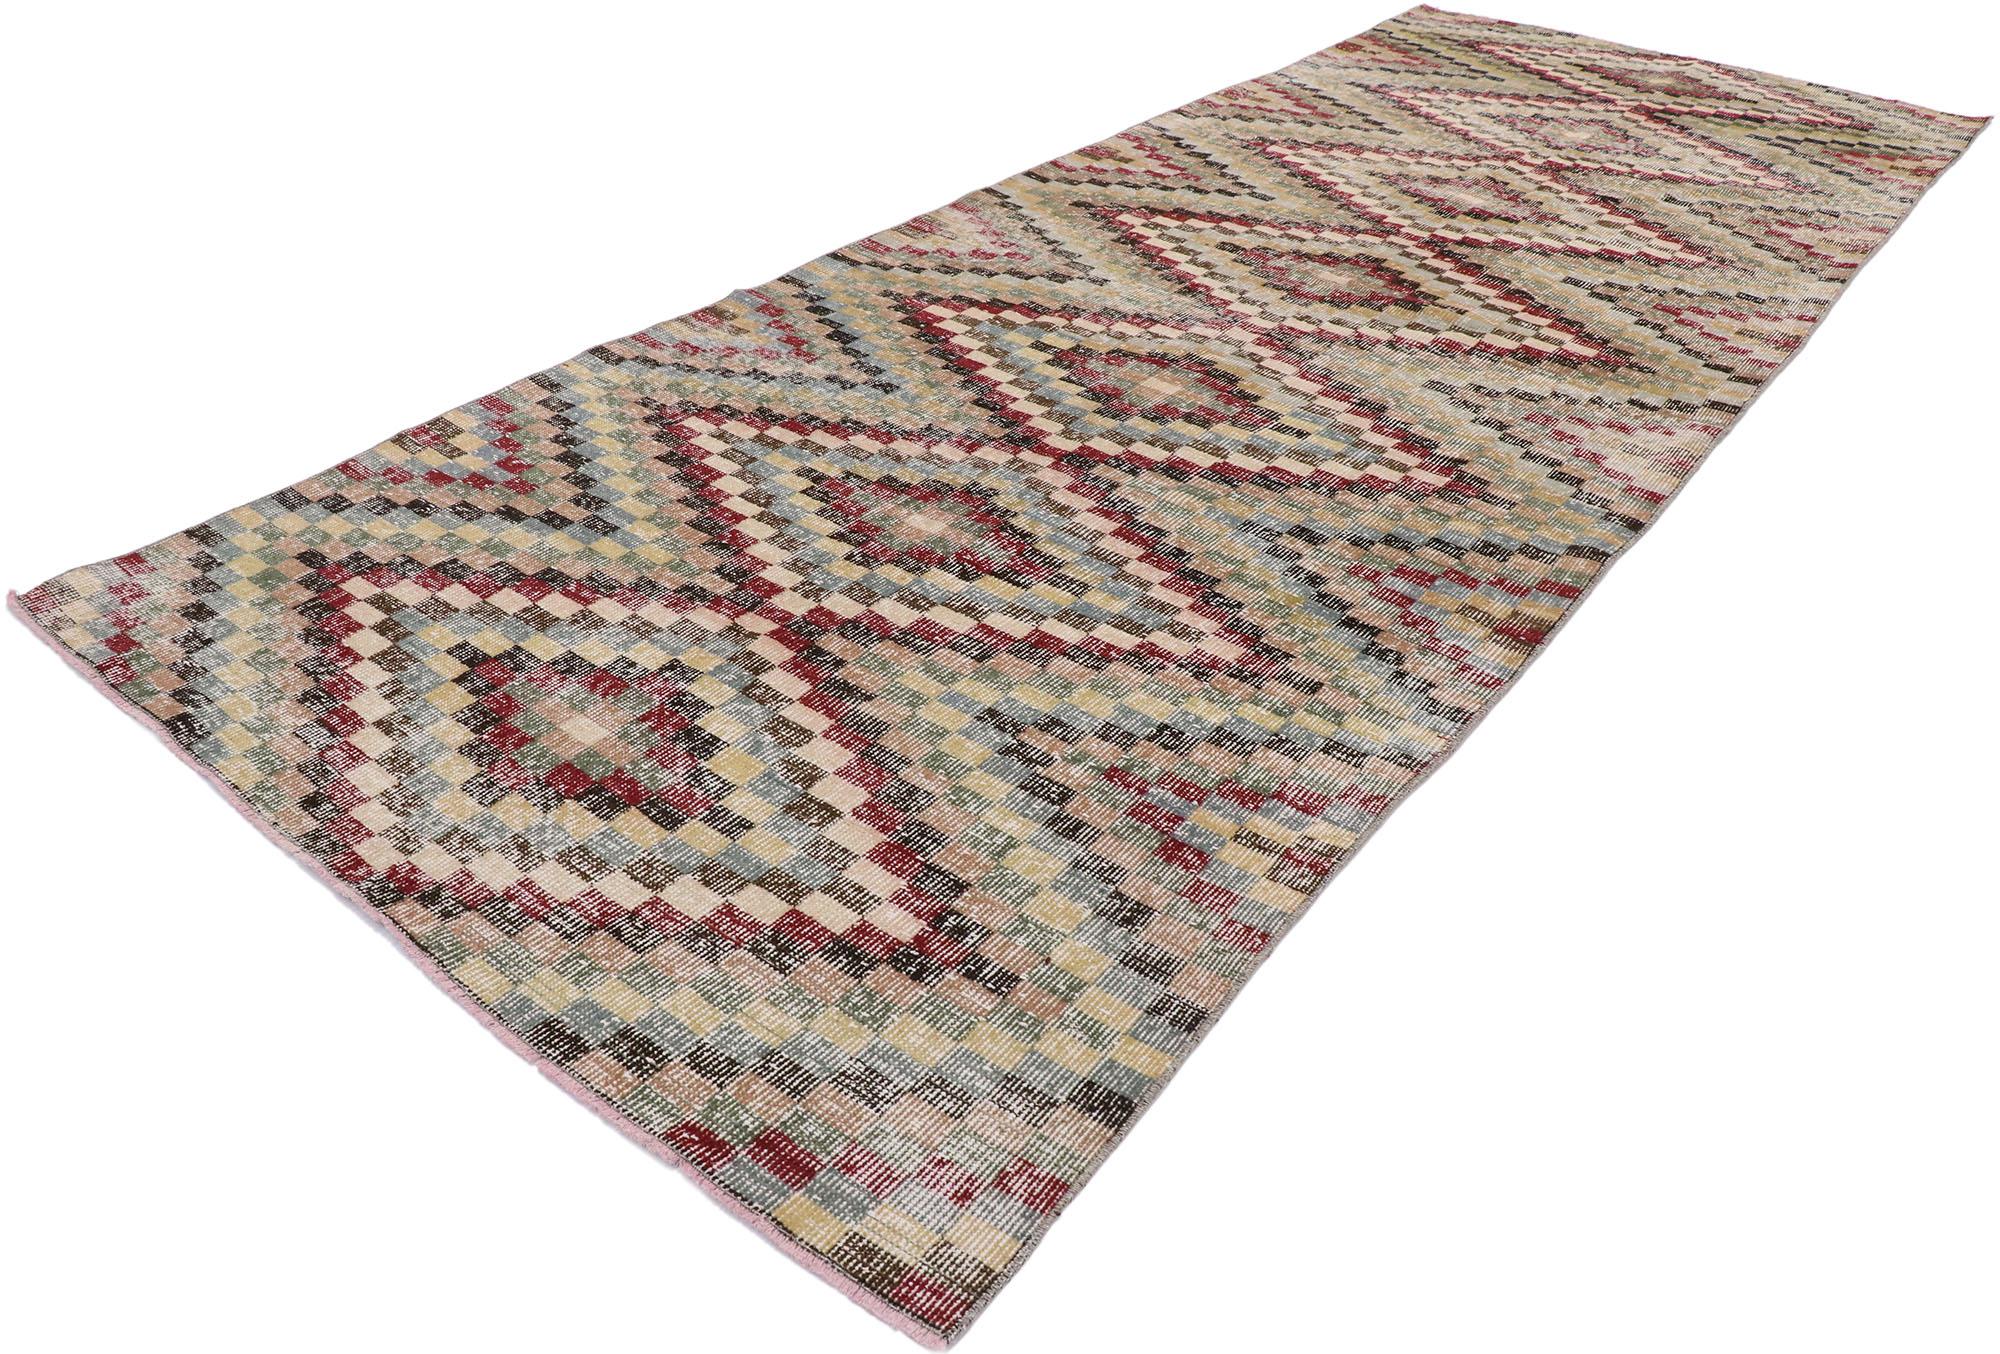 53362 distressed vintage Turkish Sivas runner with Mid-Century Modern Rustic style. This hand knotted wool distressed vintage Turkish Sivas rug features an all-over checkered diamond pattern comprised of rows of multicolored cubes. Each row of